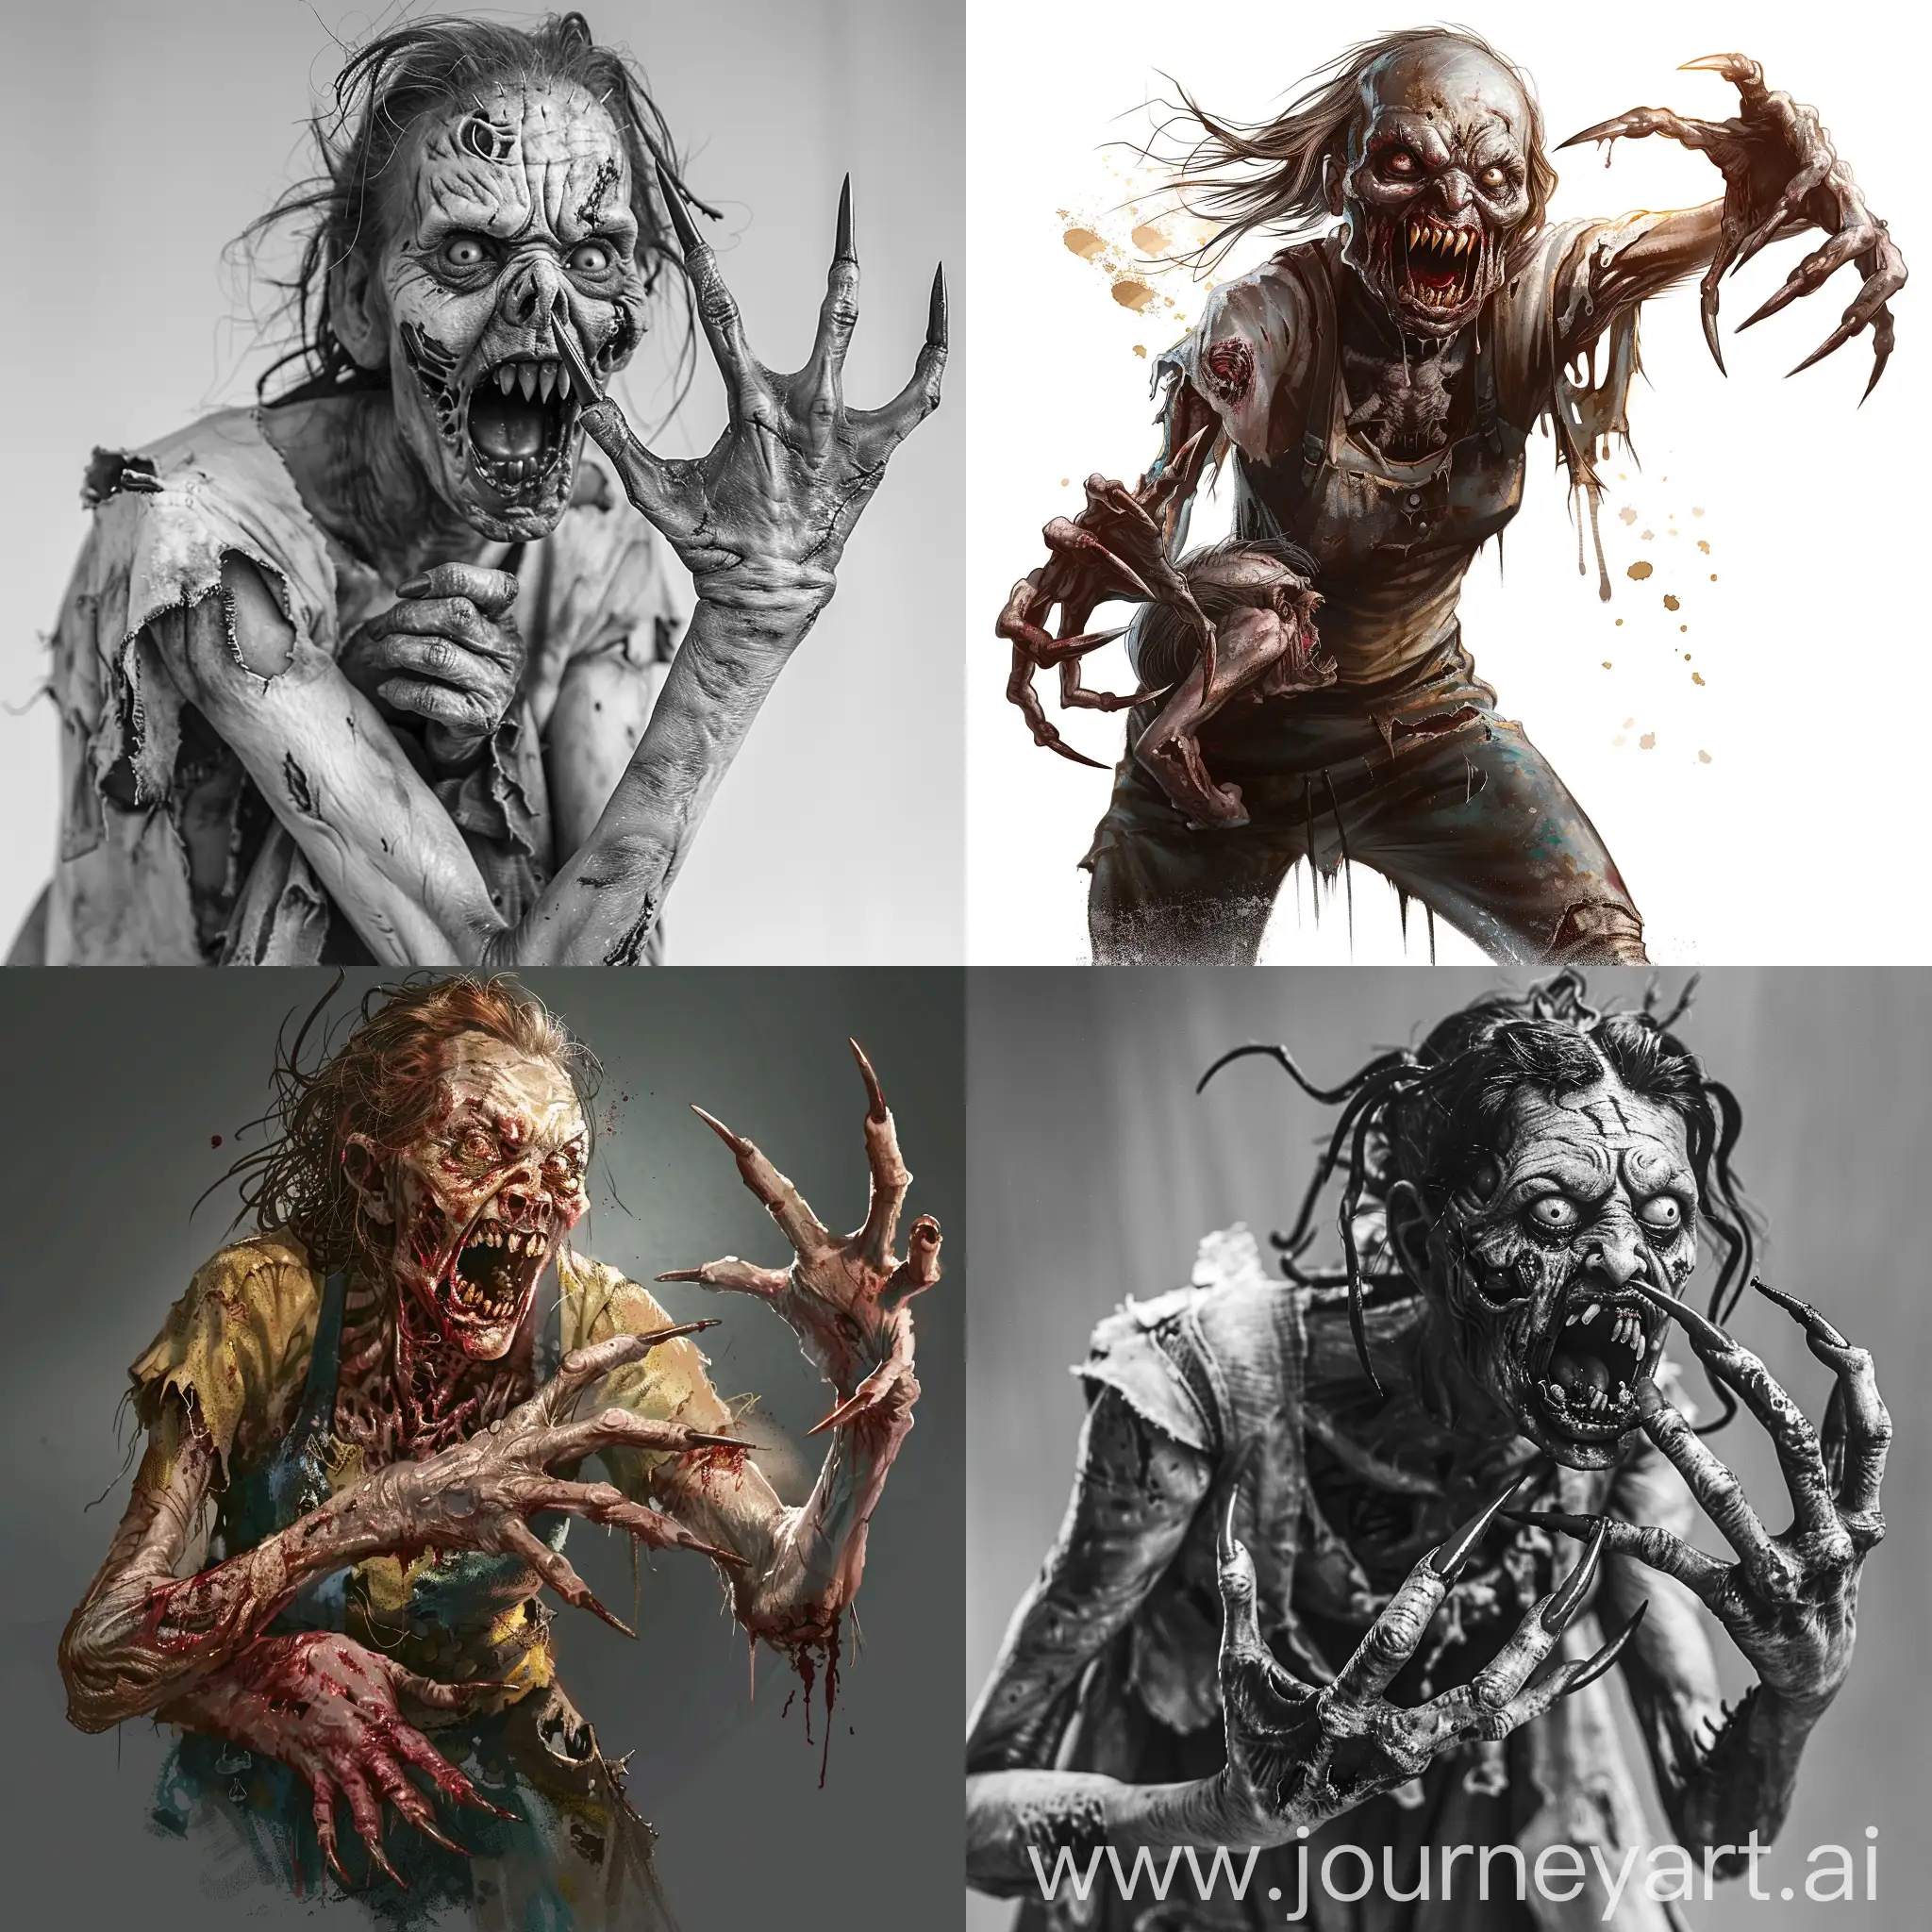 "Describe a zombie woman as follows: she is hungry and ugly, has long curved pointed nails on each of her five fingers, opens her pointed teeth, wears torn clothes, and is holding her victim. Provide a detailed description in a single paragraph.